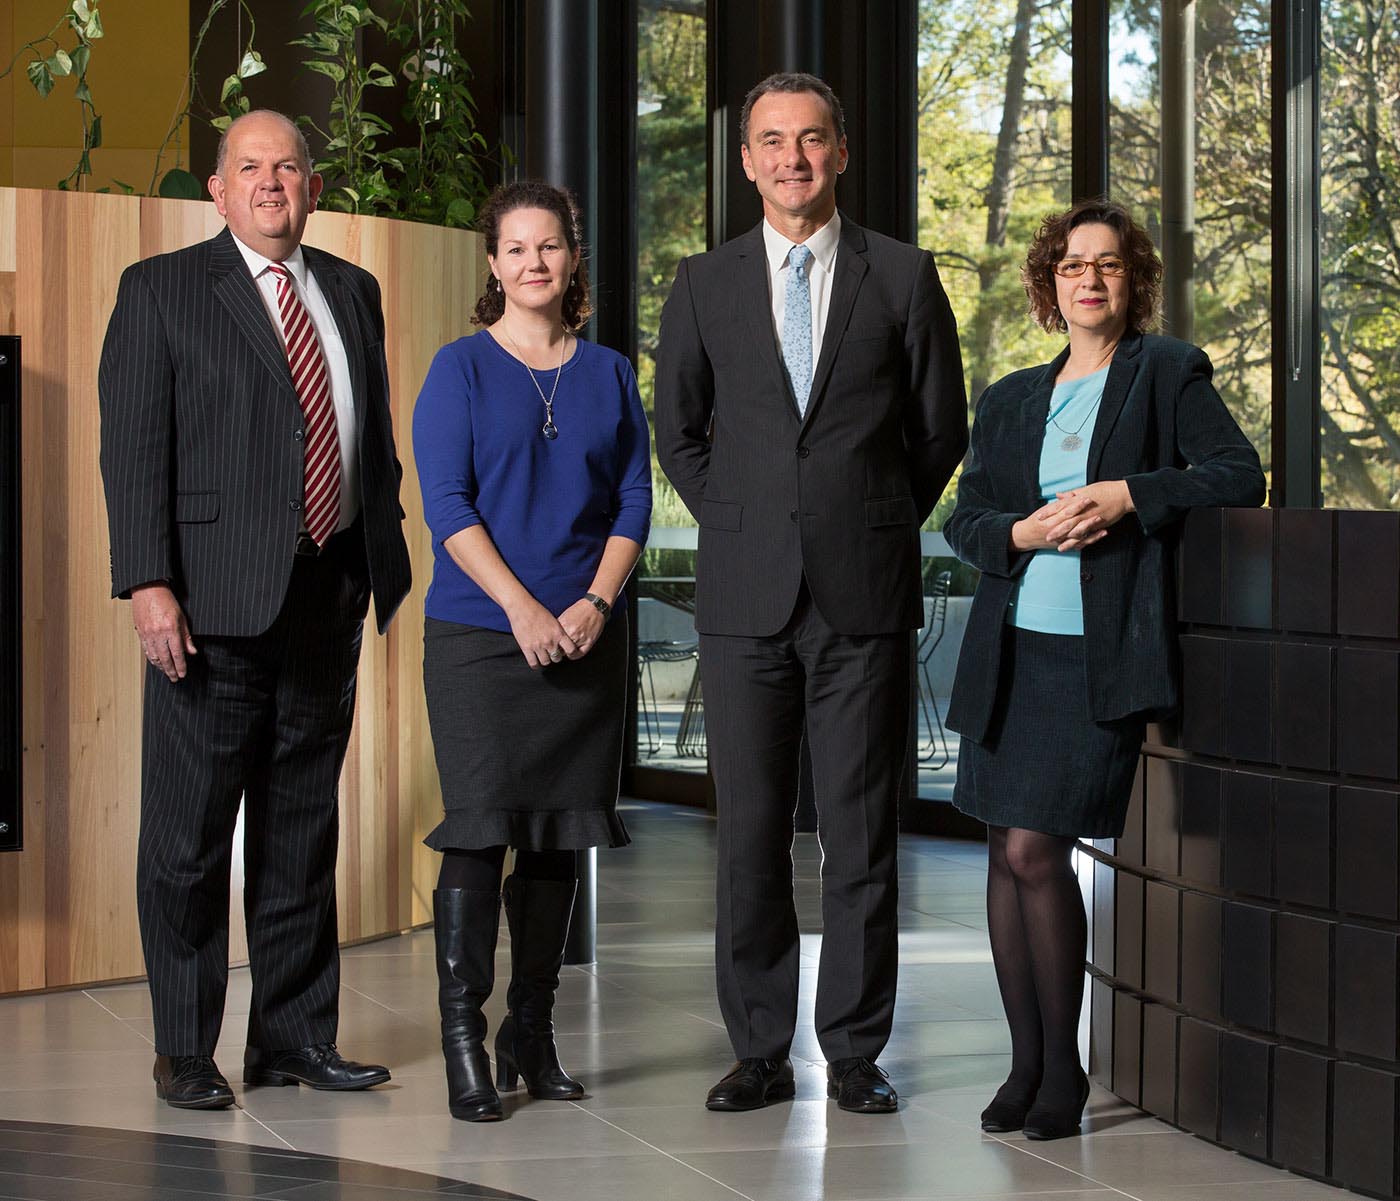 The National Museum of Australia’s executive management group (left to right): Graham Smith, Rebecca Coronel, Mathew Trinca and Helen Kon.